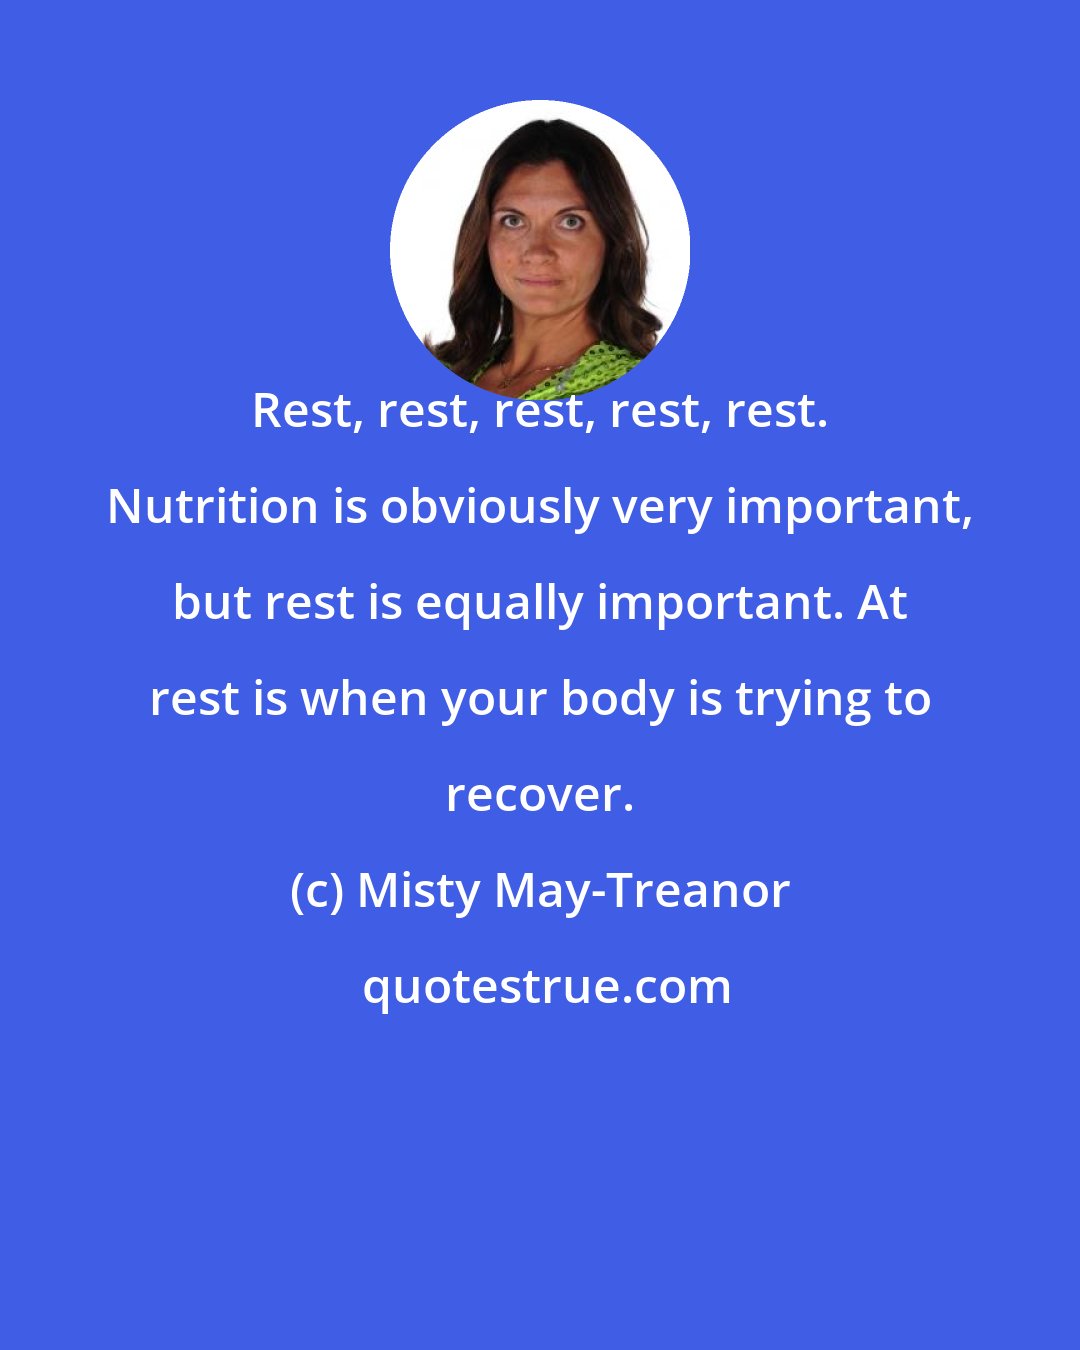 Misty May-Treanor: Rest, rest, rest, rest, rest. Nutrition is obviously very important, but rest is equally important. At rest is when your body is trying to recover.